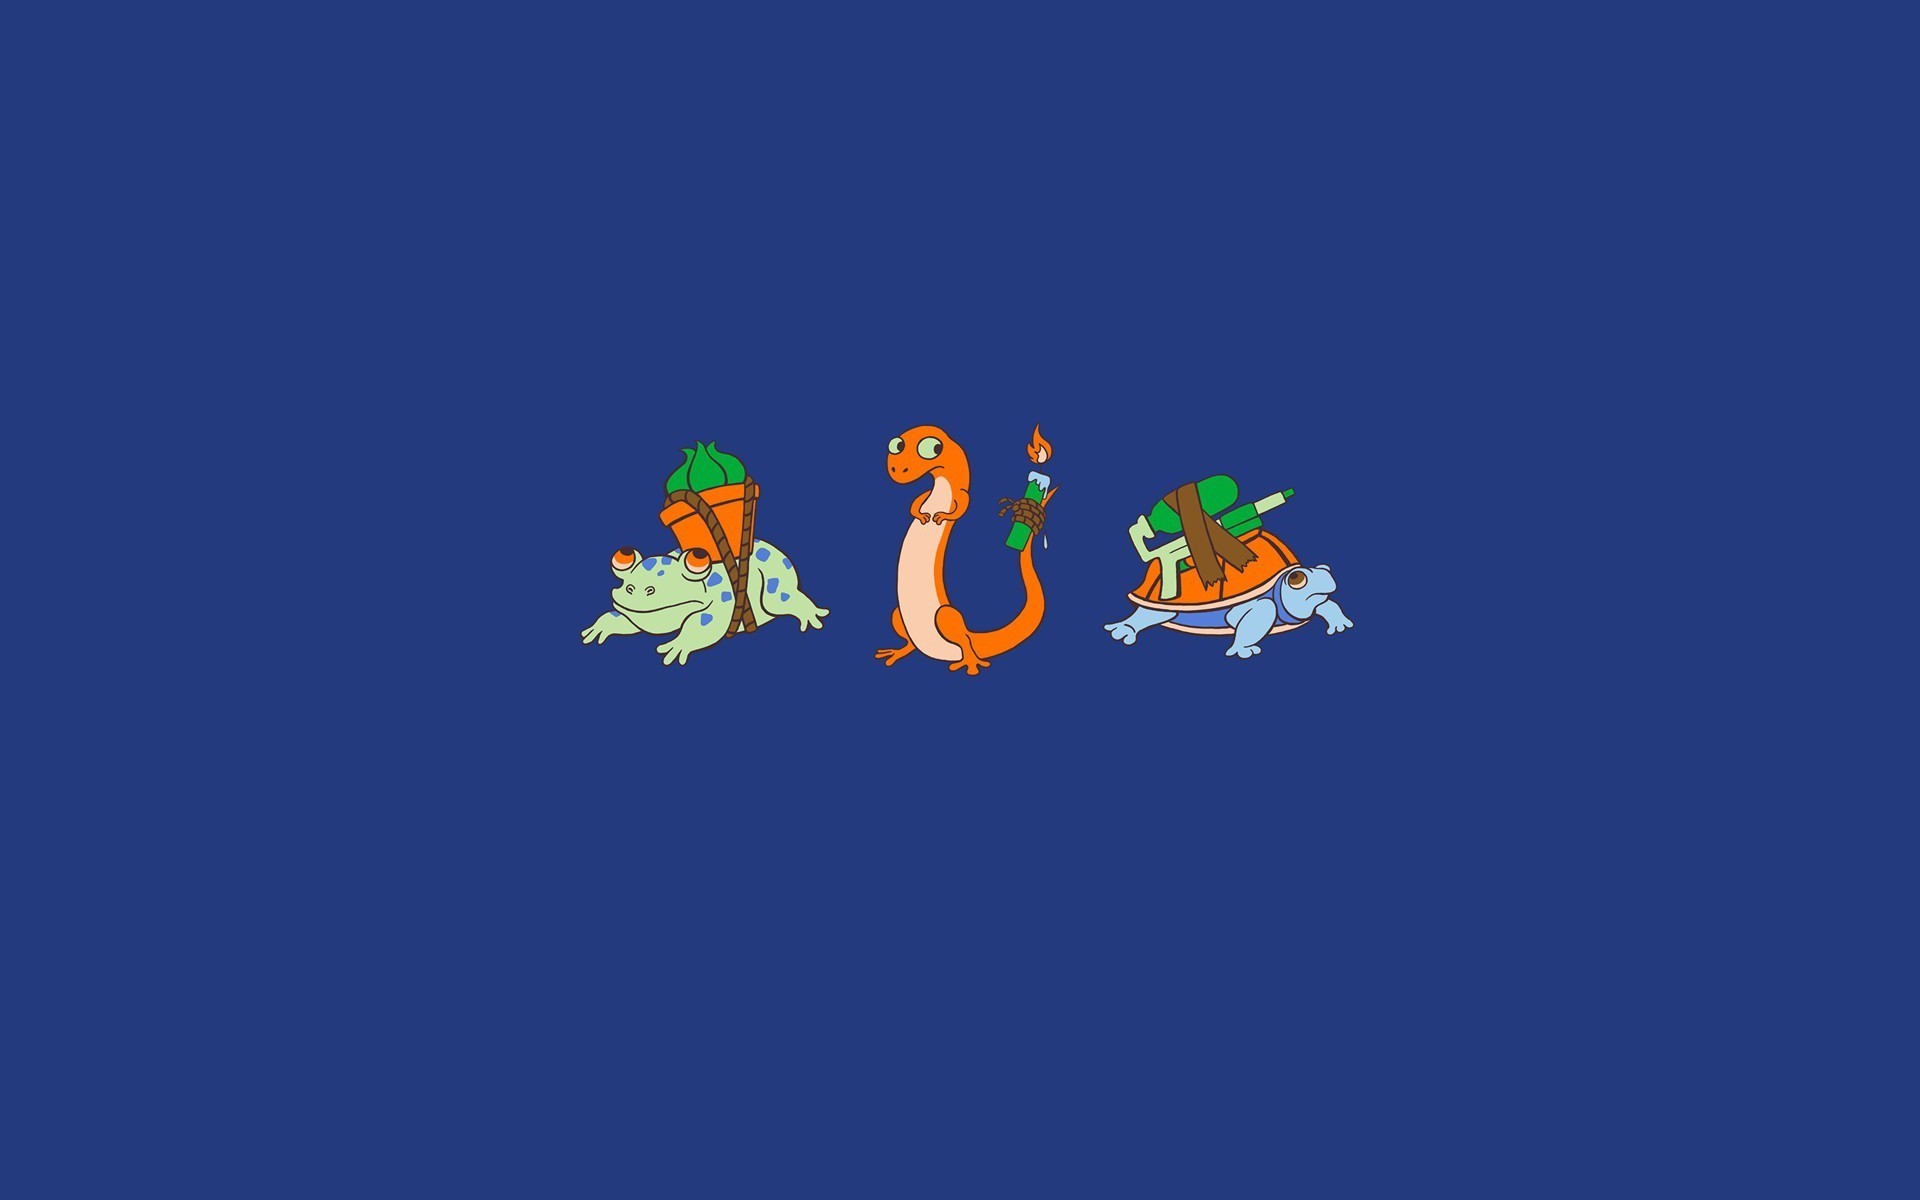 A funny image of three cartoon characters on a blue background - Pokemon